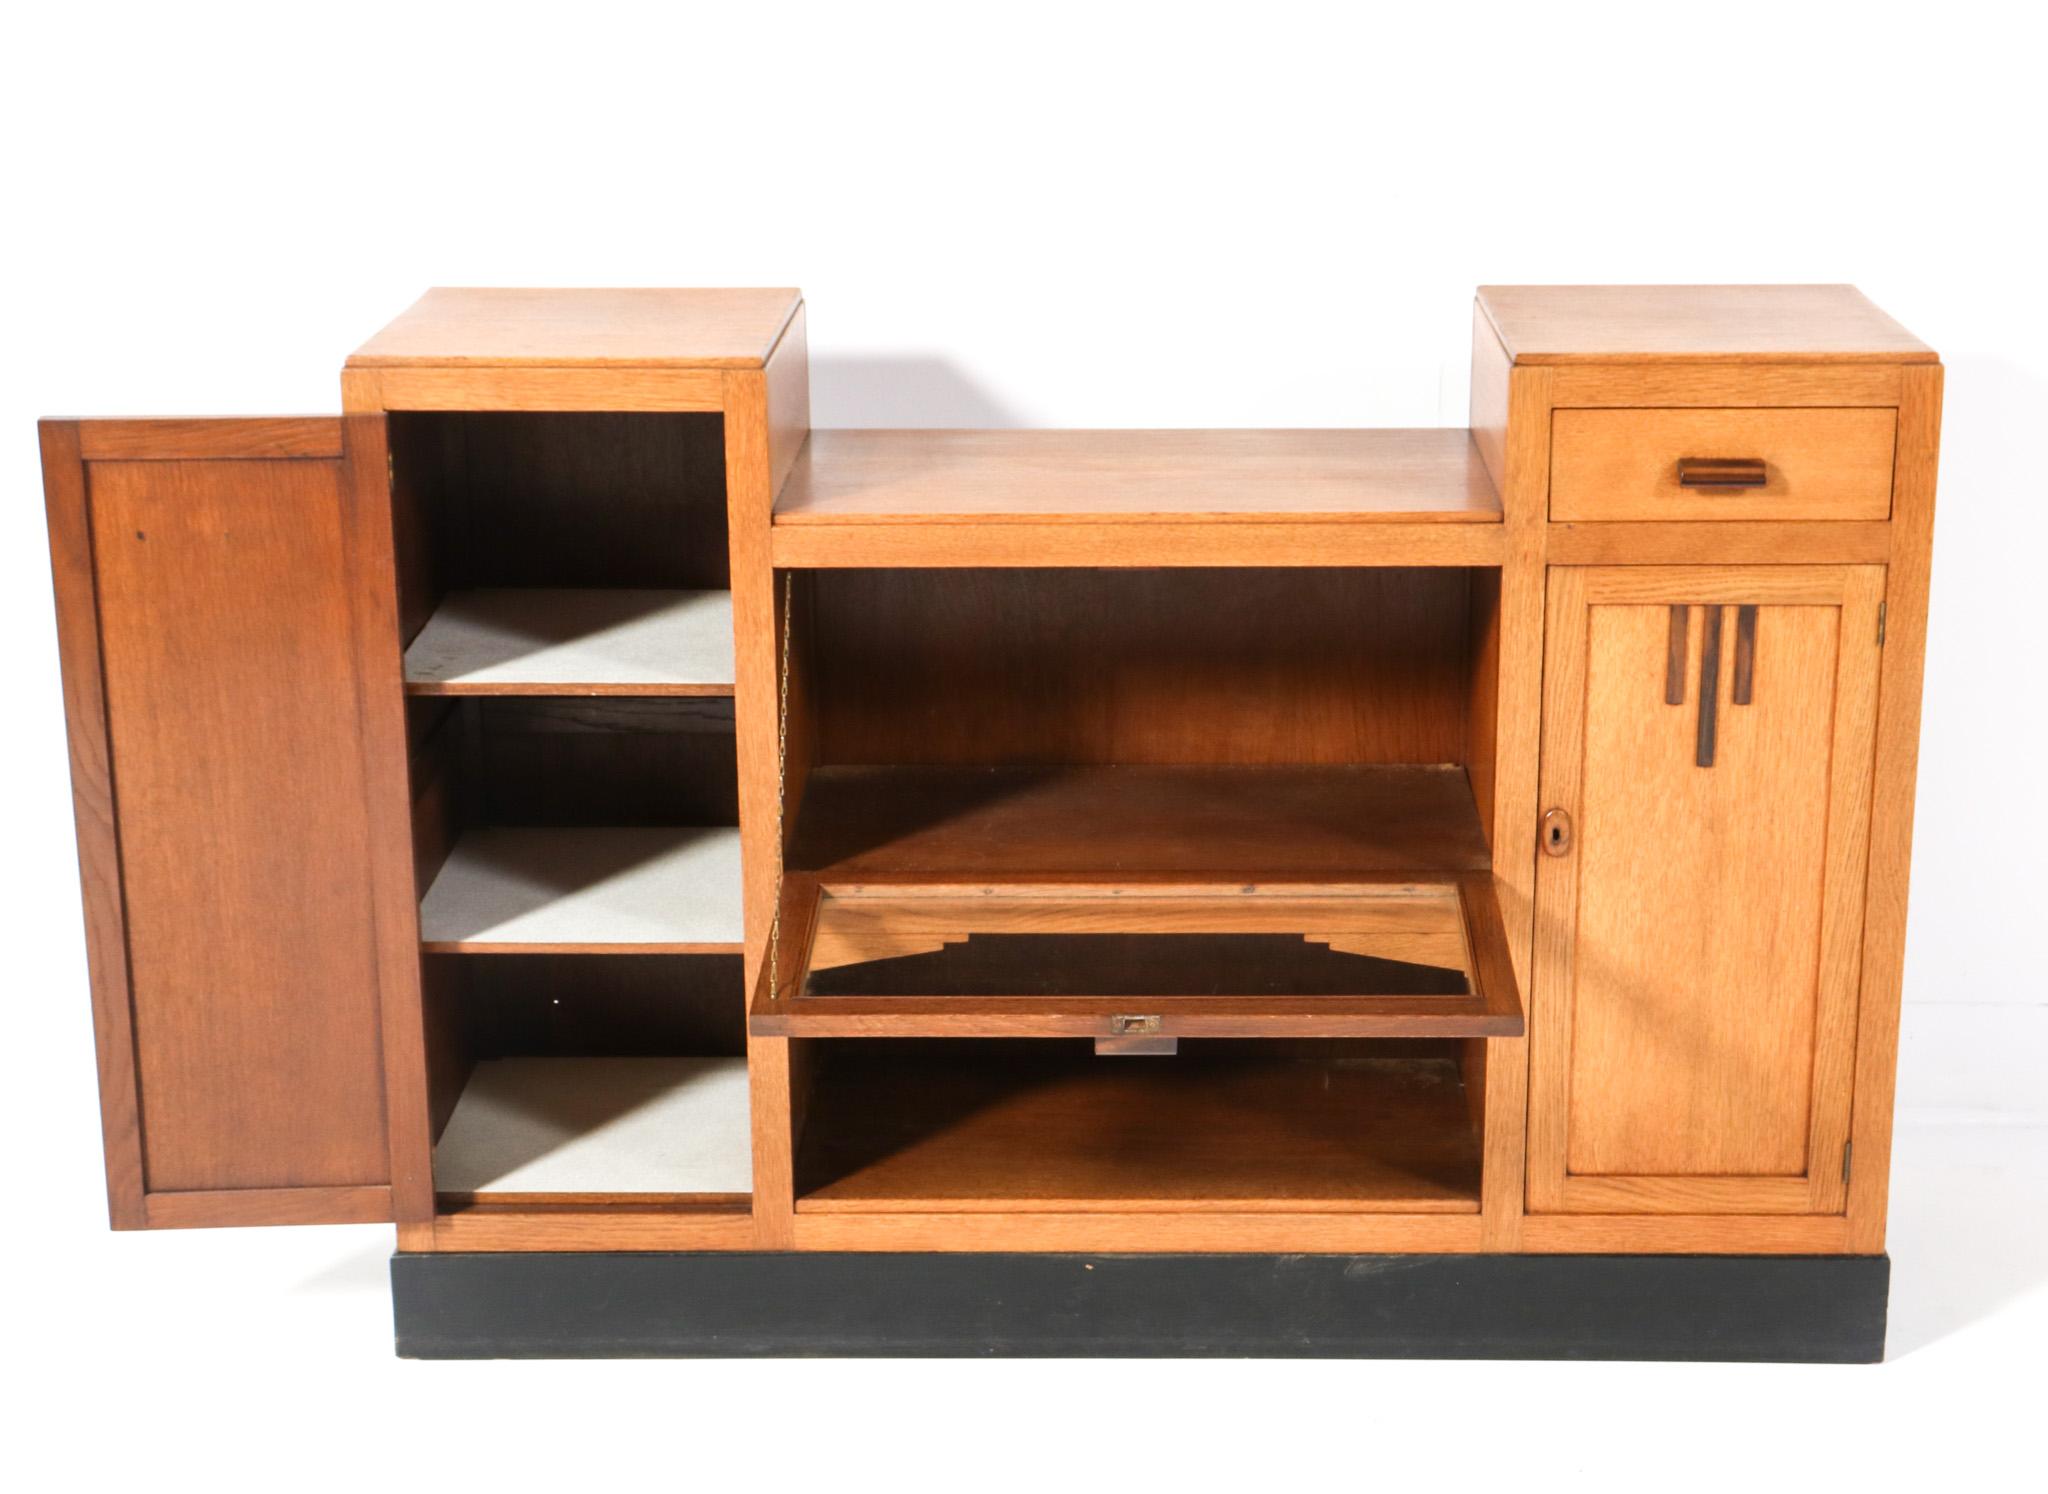 Stunning and rare Art Deco Modernist credenza or sideboard.
Striking Dutch design from the 1920s.
Solid oak base with original solid macassar ebony handles on door with glass and drawer.
Four original wooden shelves behind the left and right